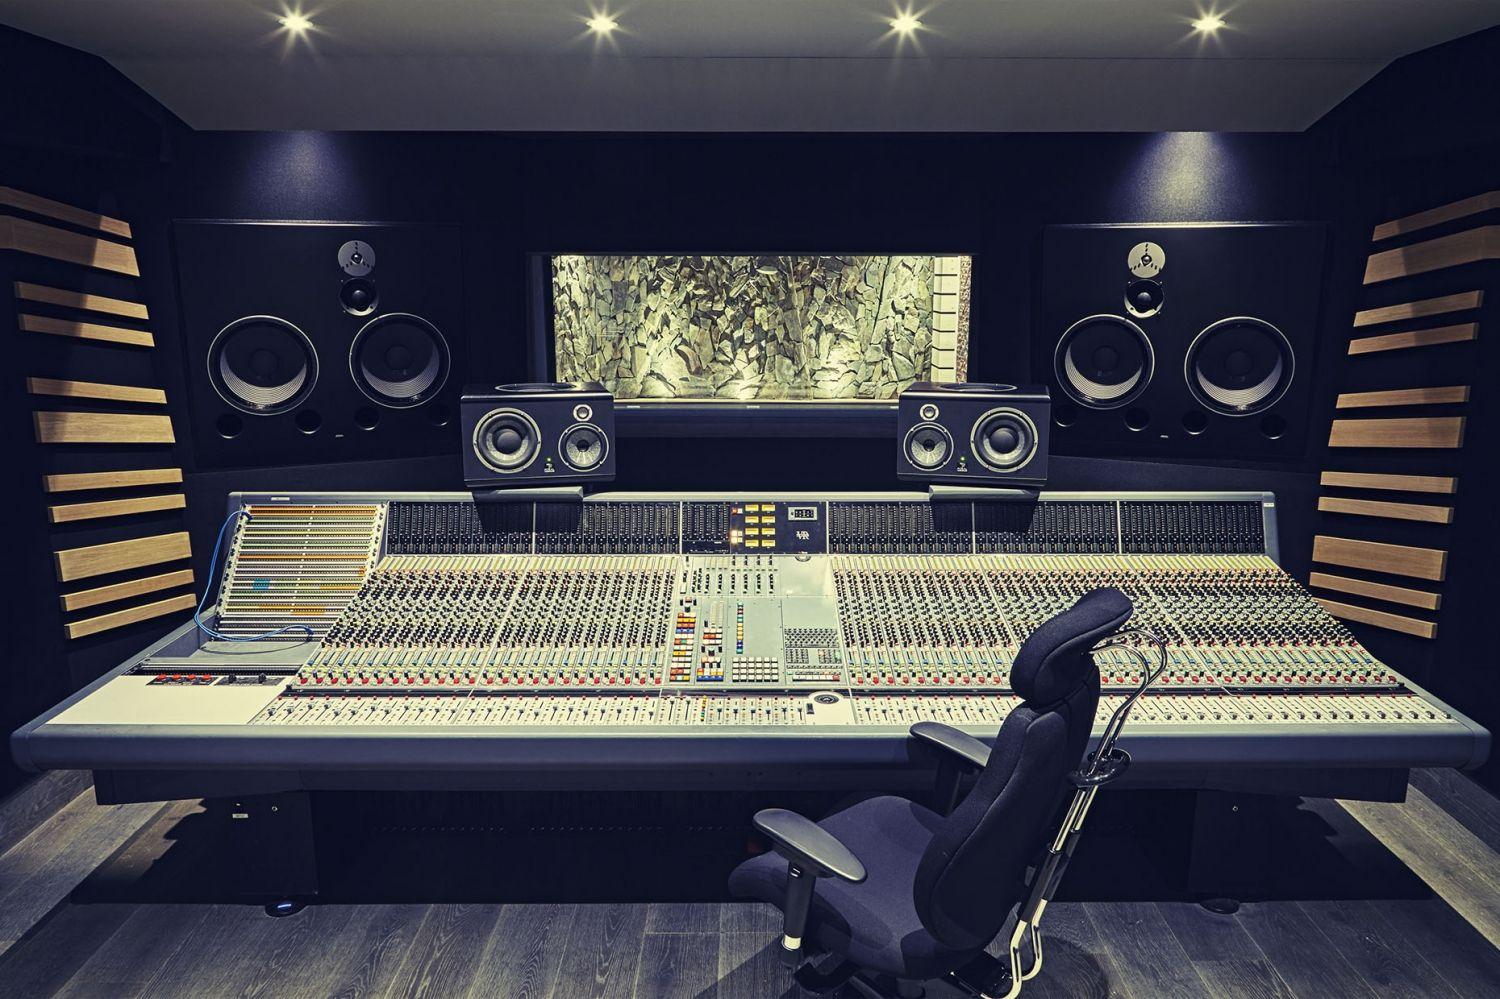 5 steps to start out as a music producer | Bandzoogle Blog